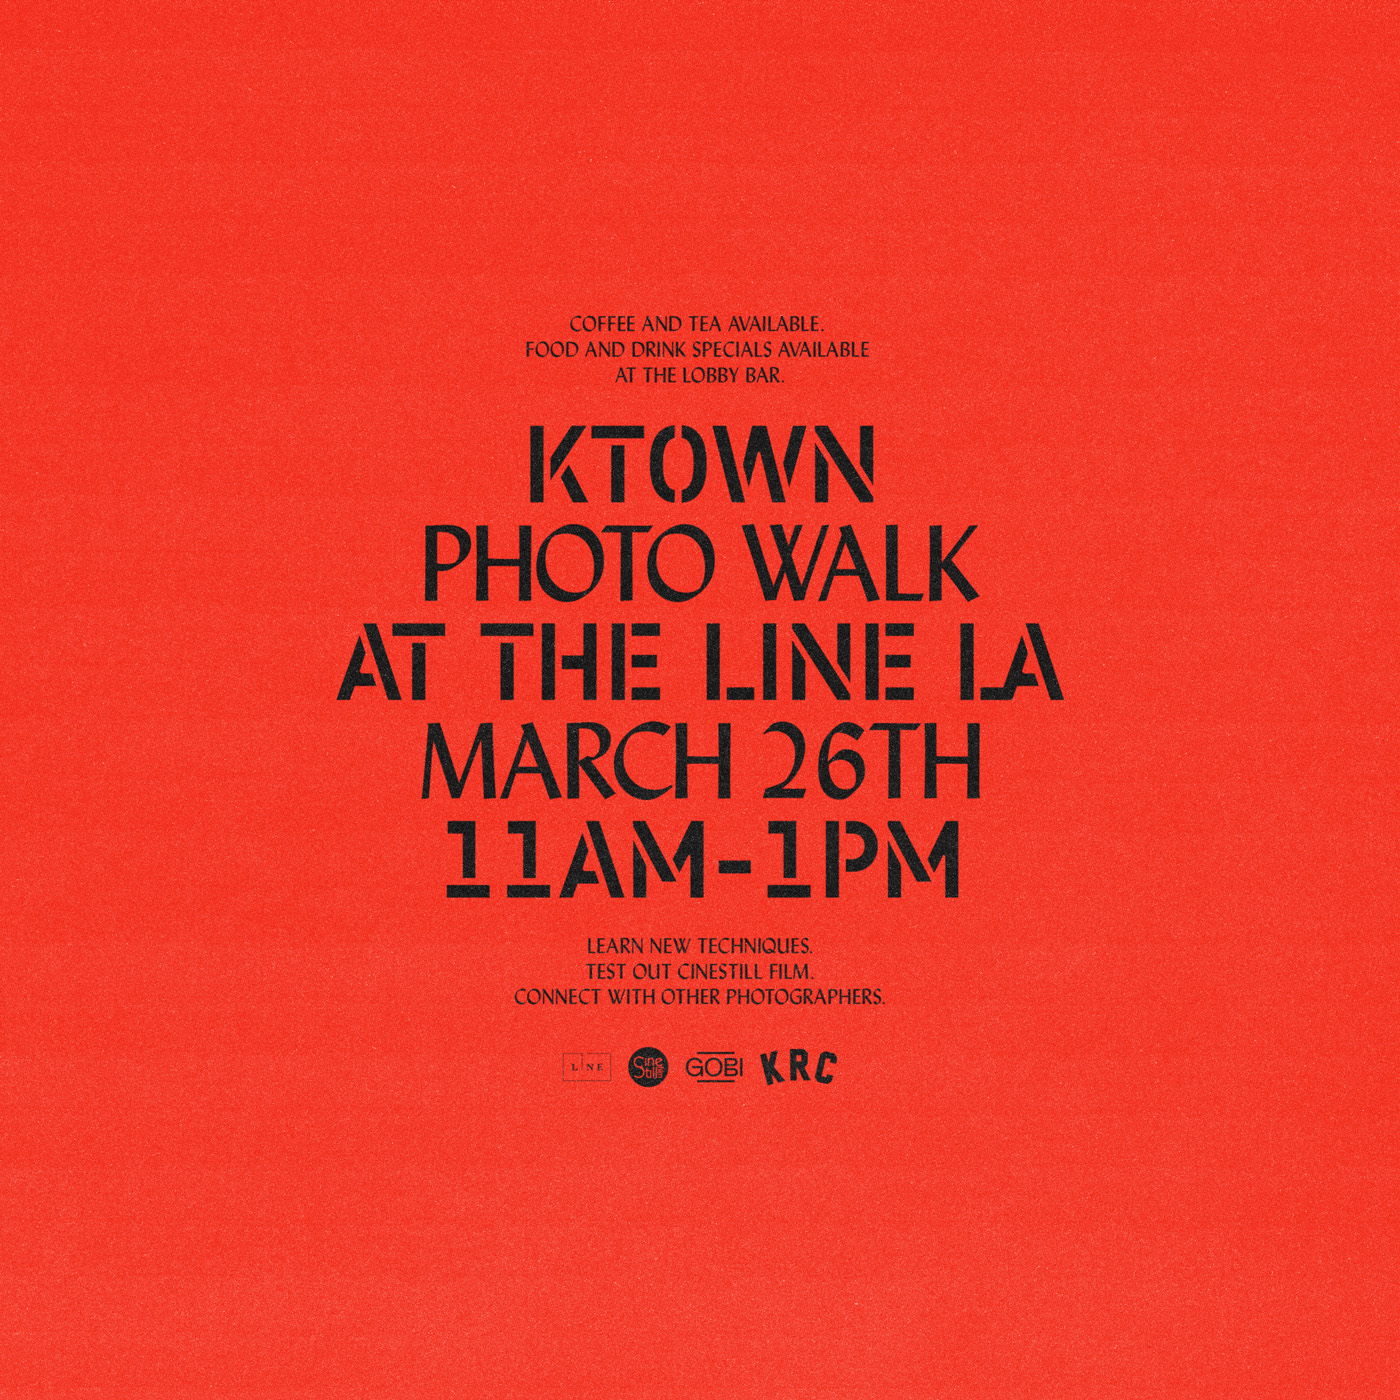 Ktown Photo walk with Gobi on Sunday, March 26th from 11am - 1pm